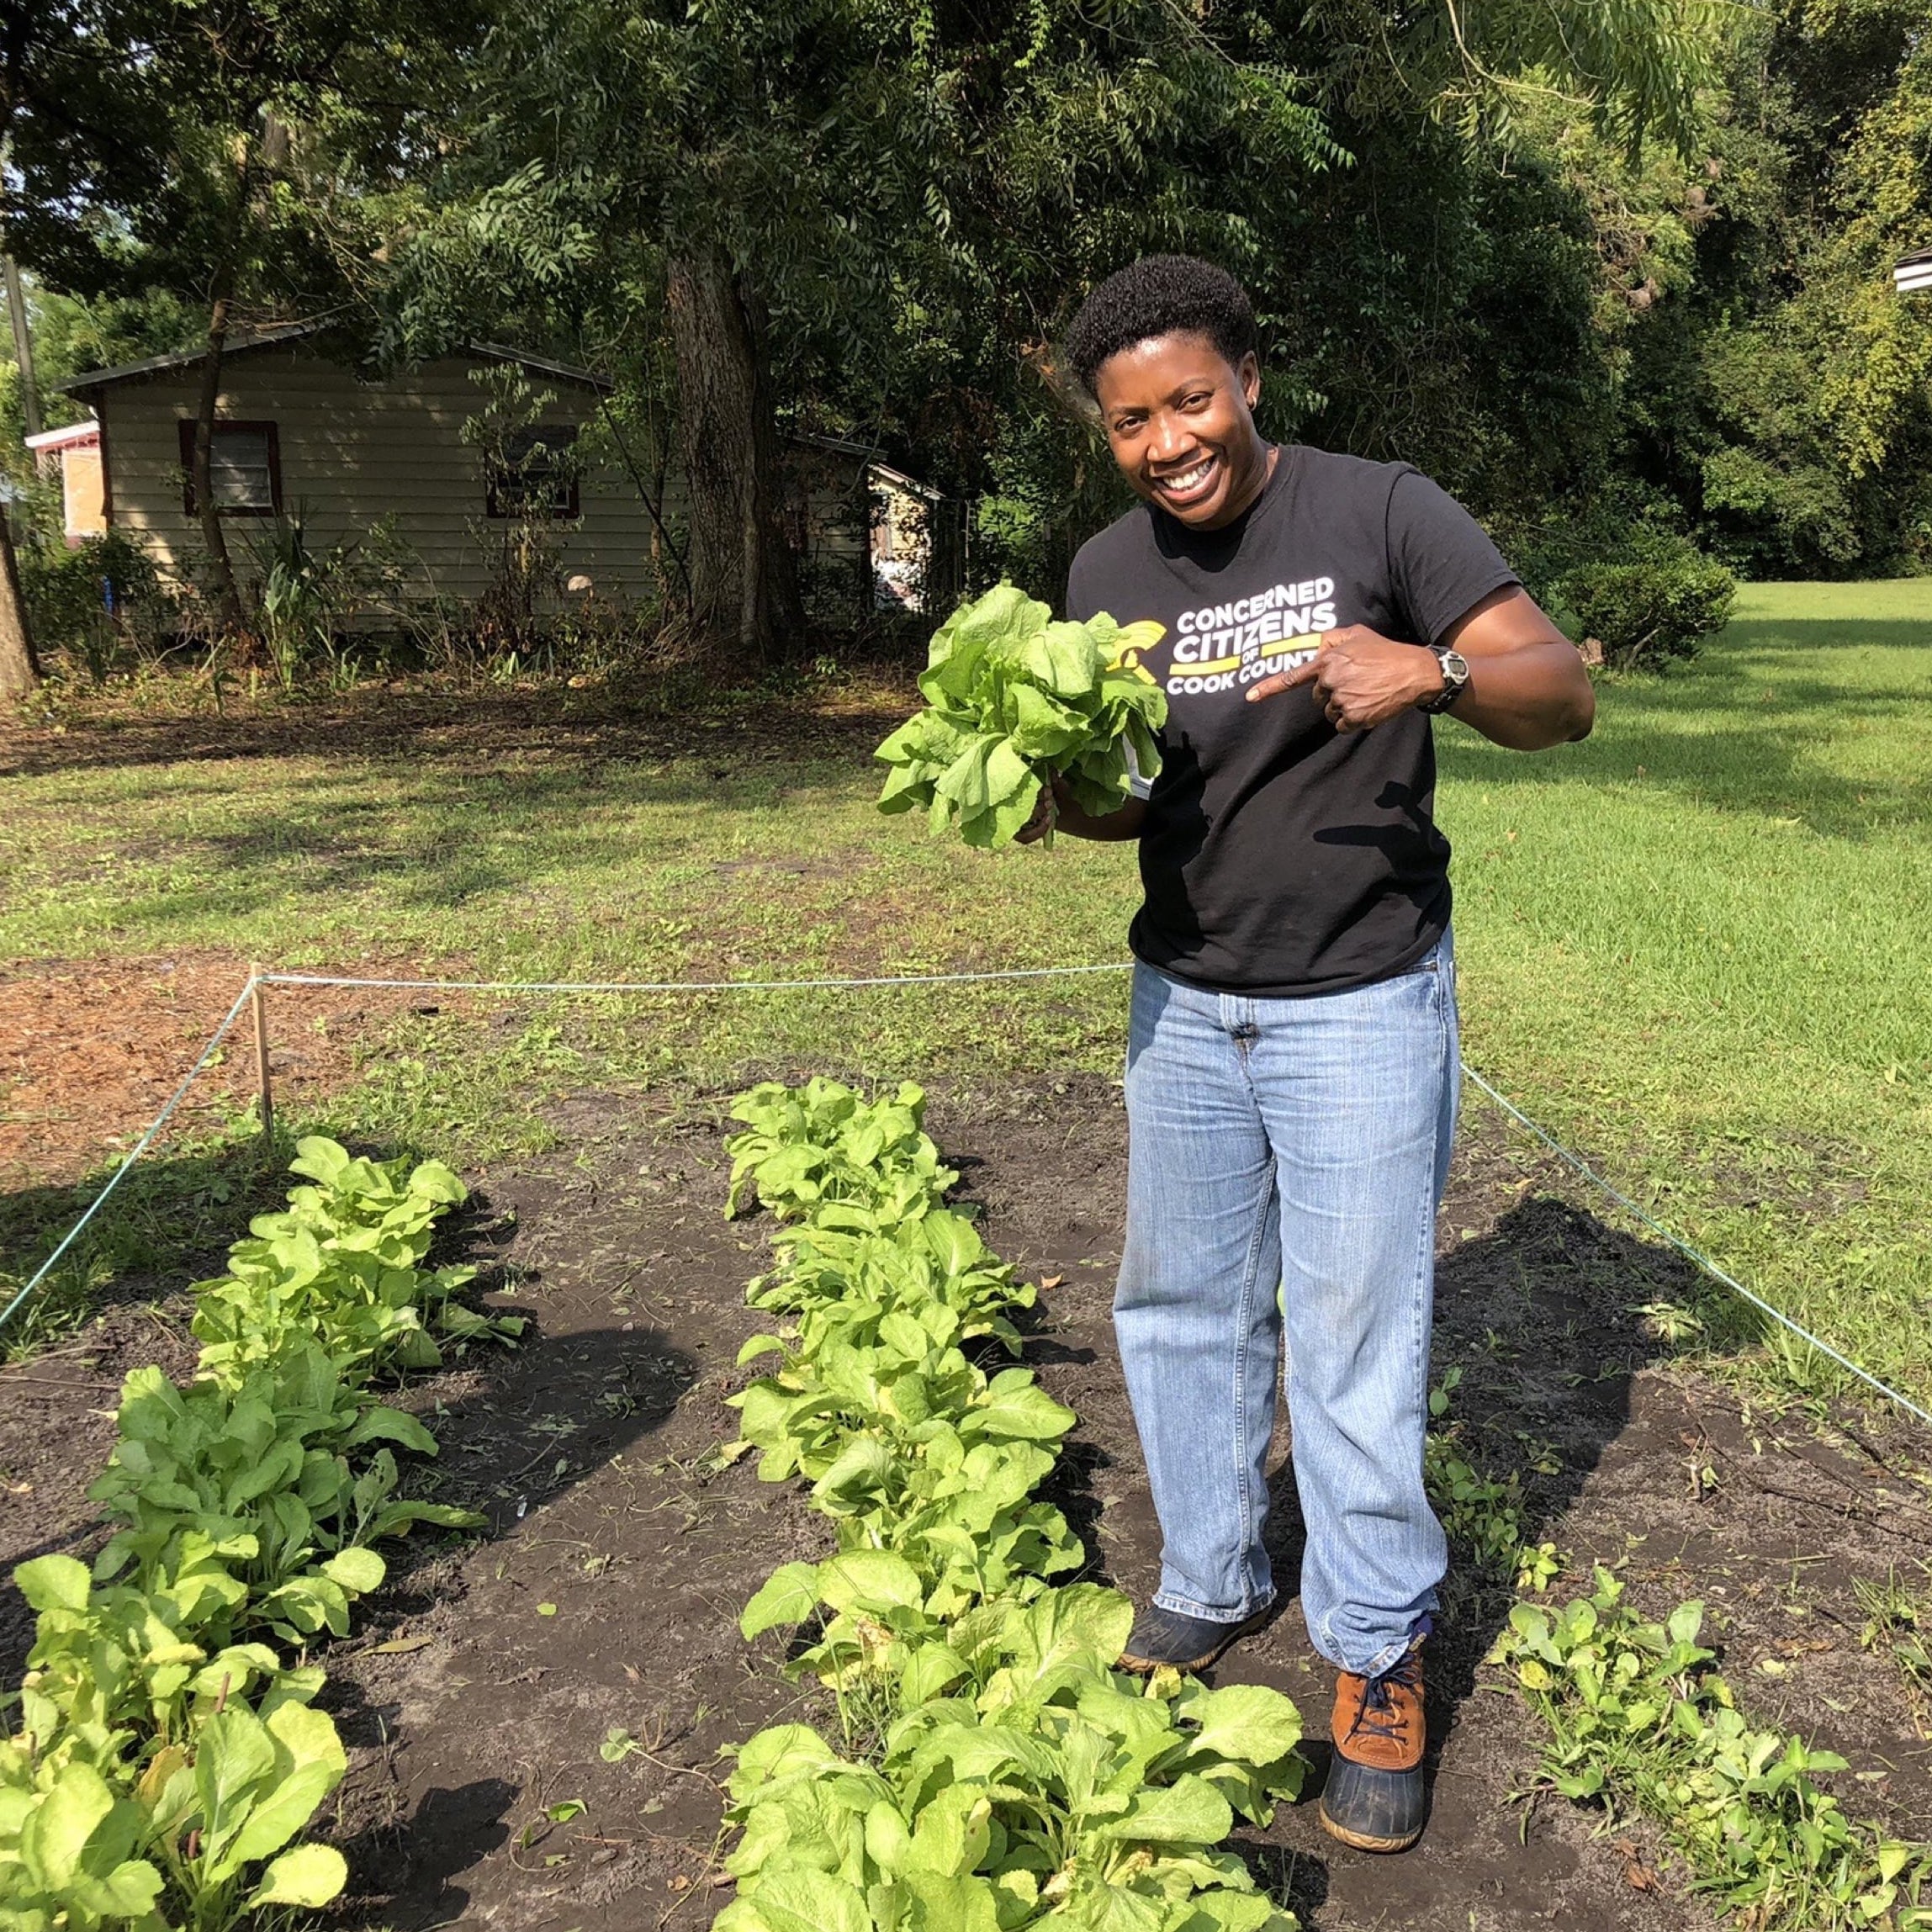 Dr. Treva Gear, founder of Concerned Citizens of Cook County (4C) holding up a head of lettuce in a community garden.